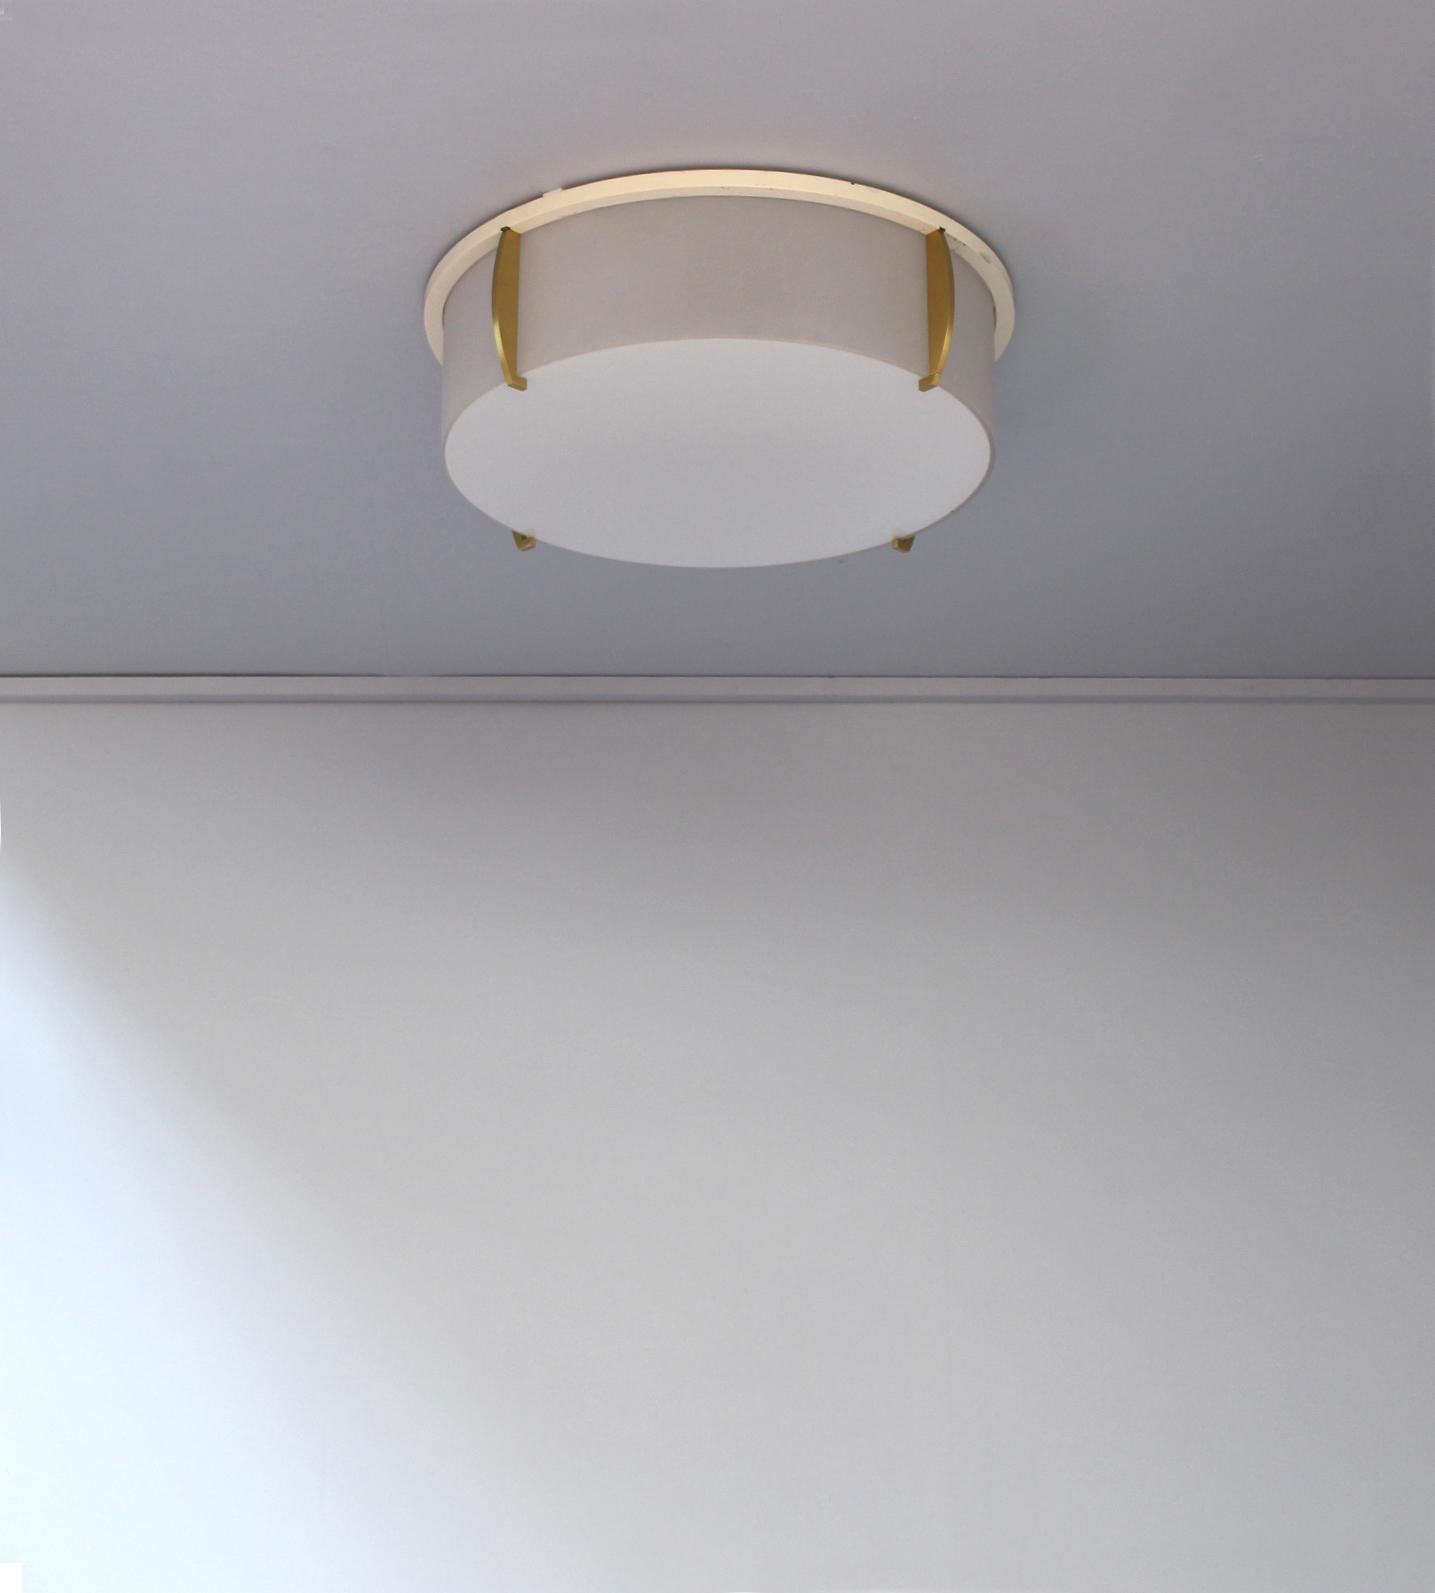 Mounted on a gold lacquered bronze and lacquered metal crown-shaped frame that holds the curved frosted glass diffusers.
The flat enameled bottom glass diffuser is removable in order to change the bulbs.